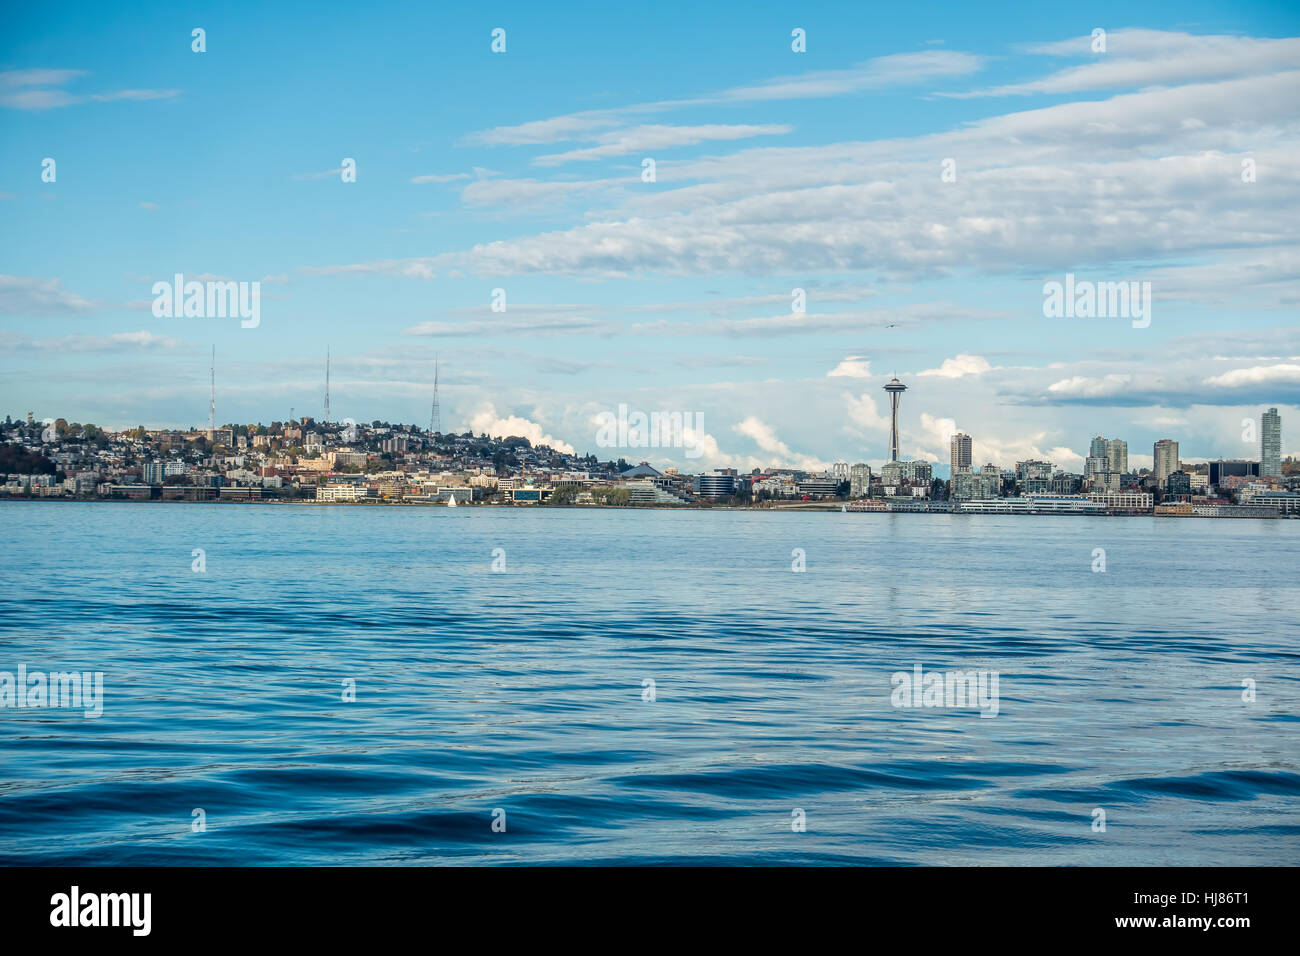 A view of the Seattle skyline. Stock Photo